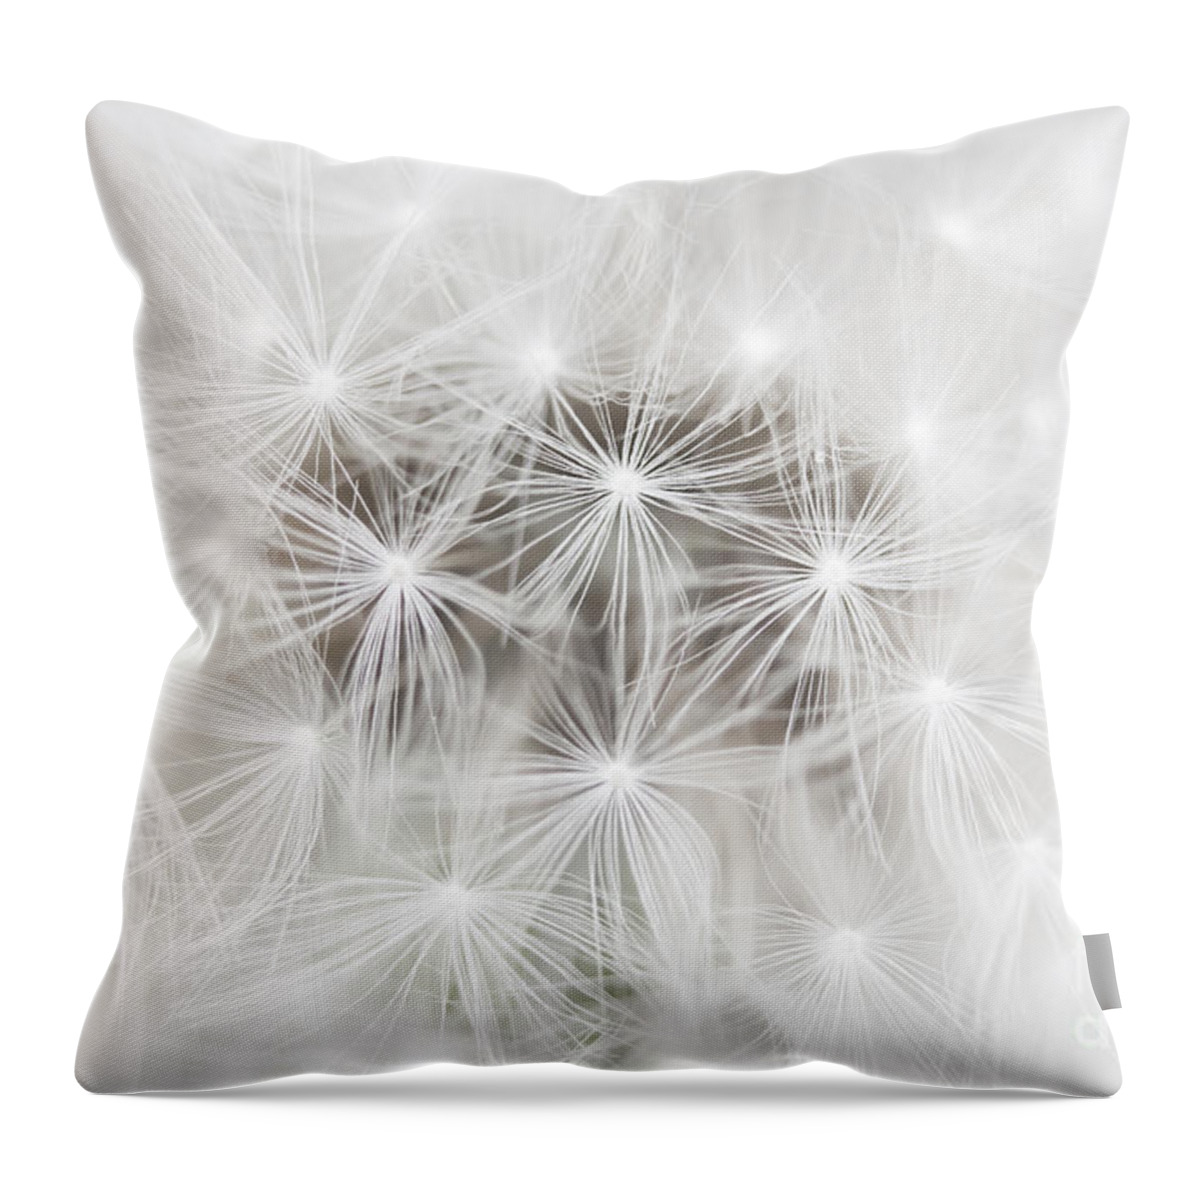 Dandelion Throw Pillow featuring the photograph Make a Wish by Patty Colabuono